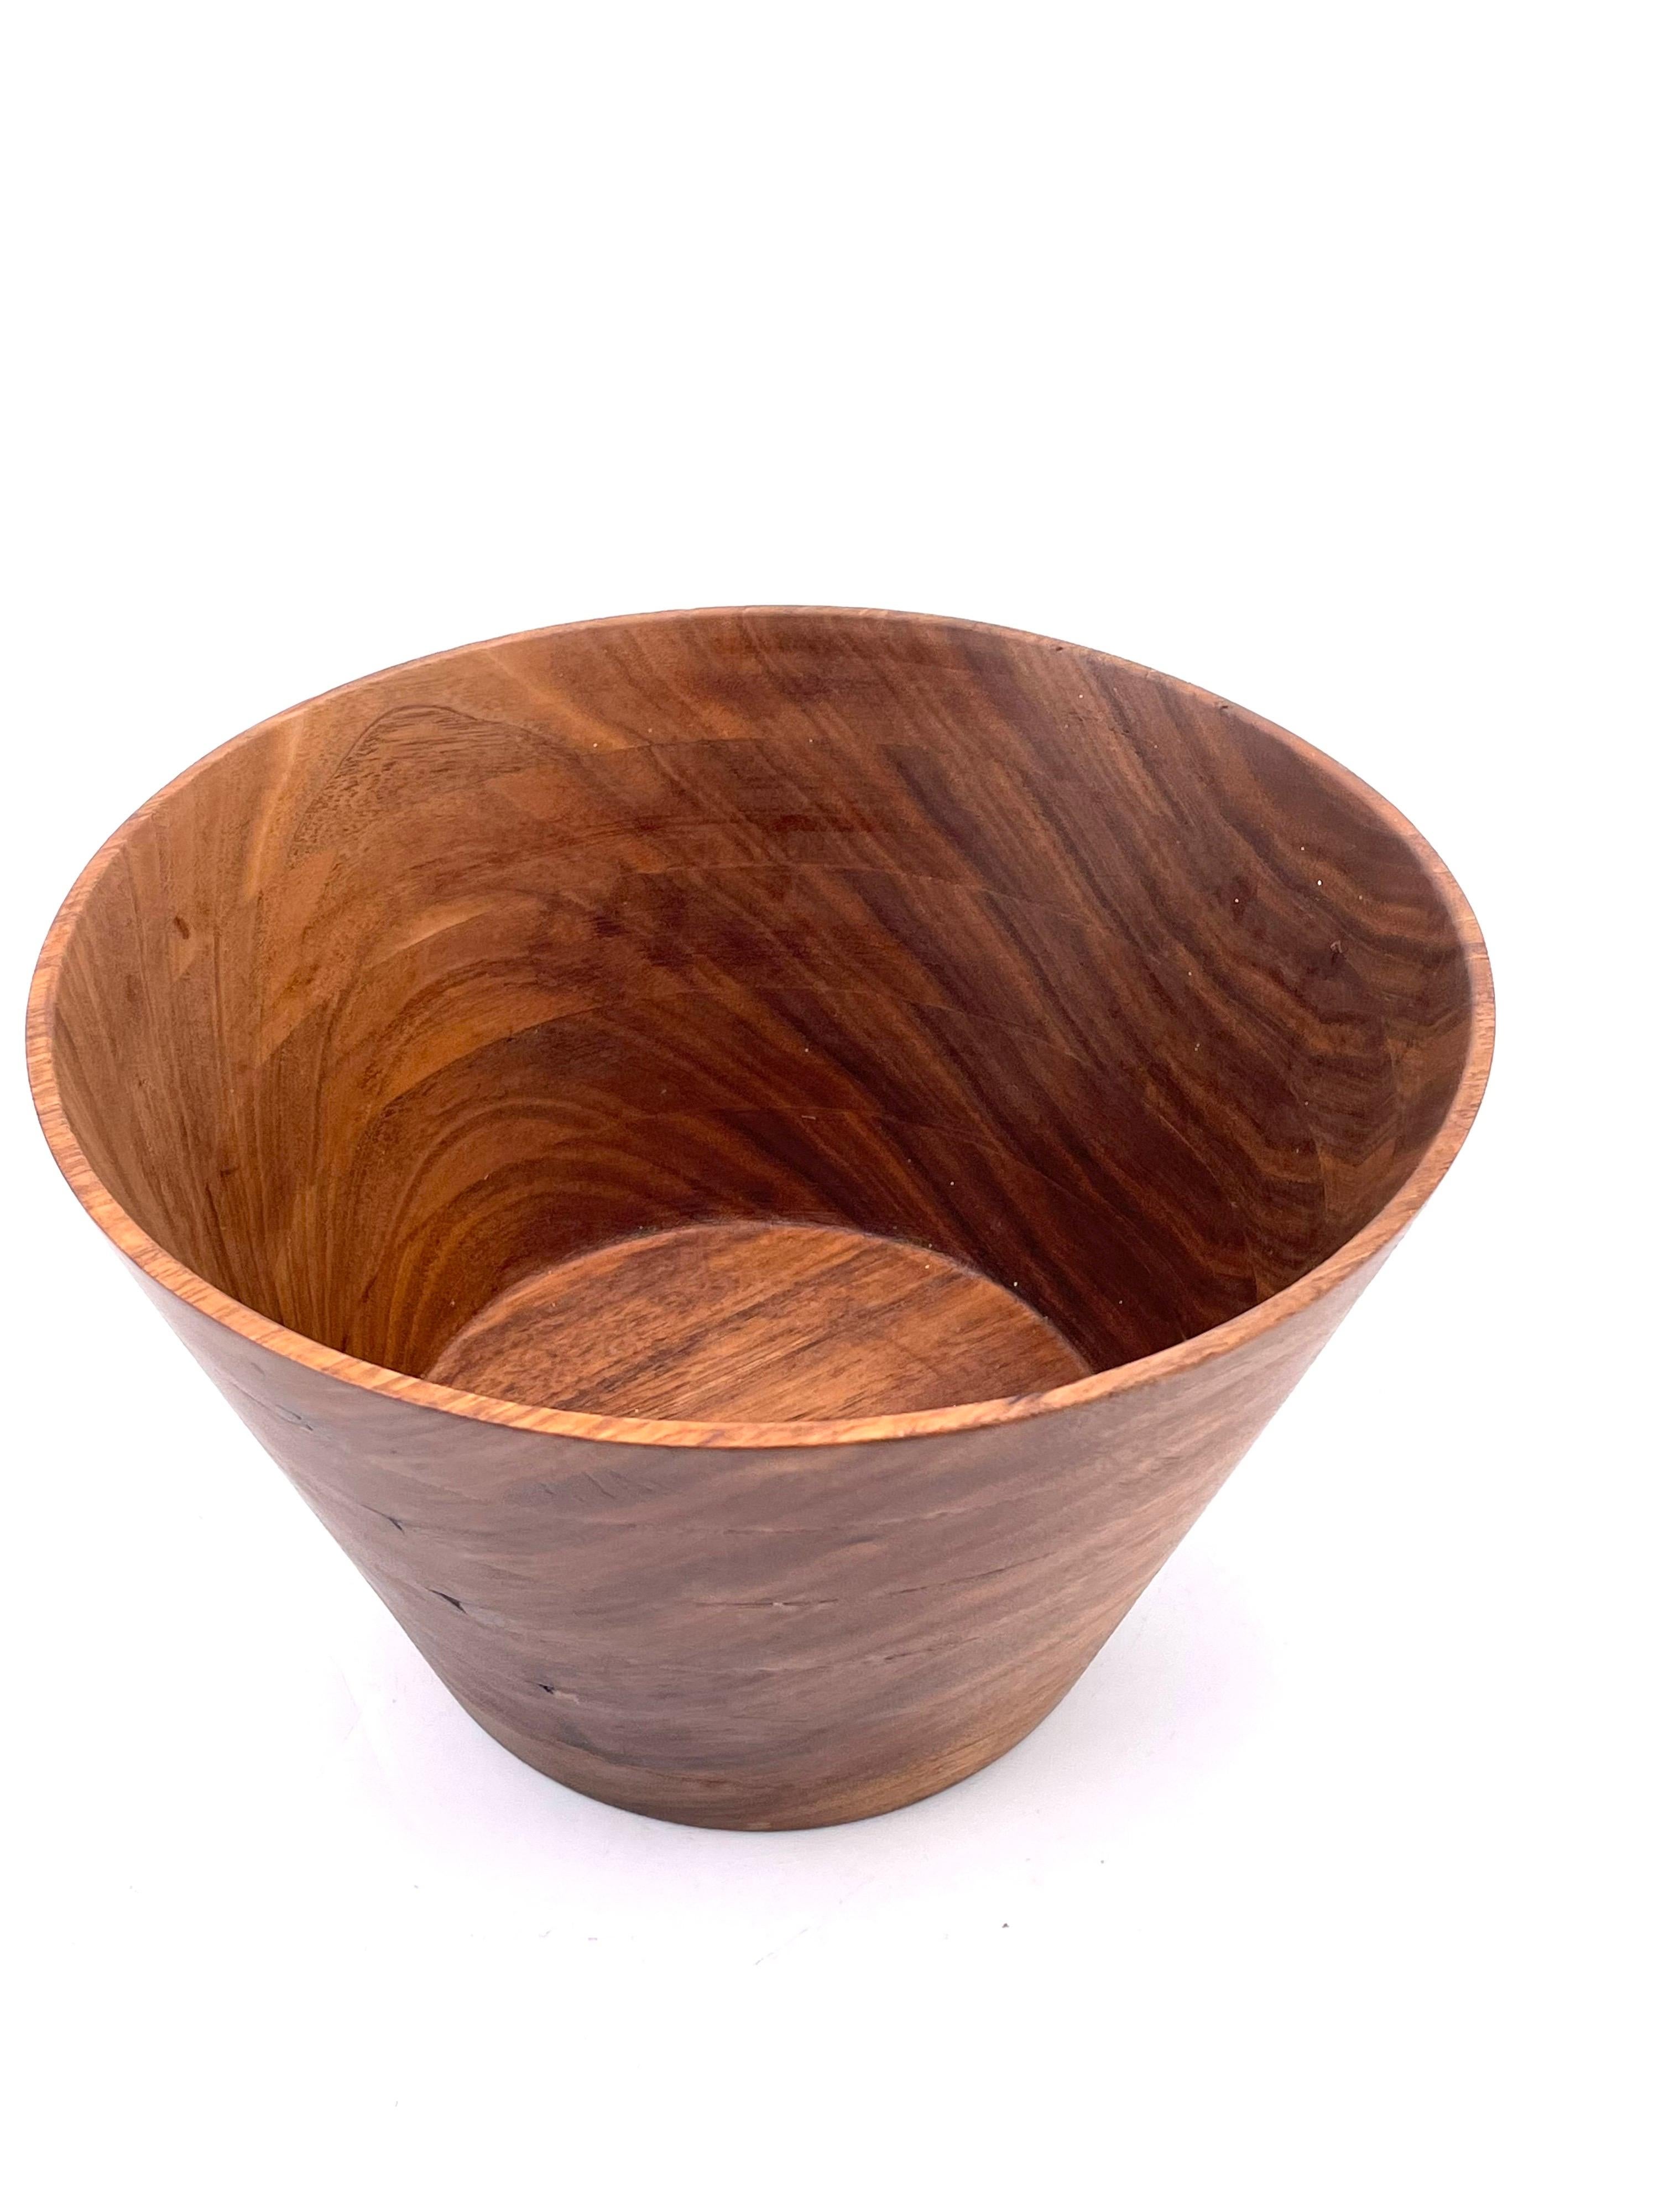 A beautiful piece of art hand-turned walnut cone-shaped bowl, circa 1970s great condition beautiful grain and quality.